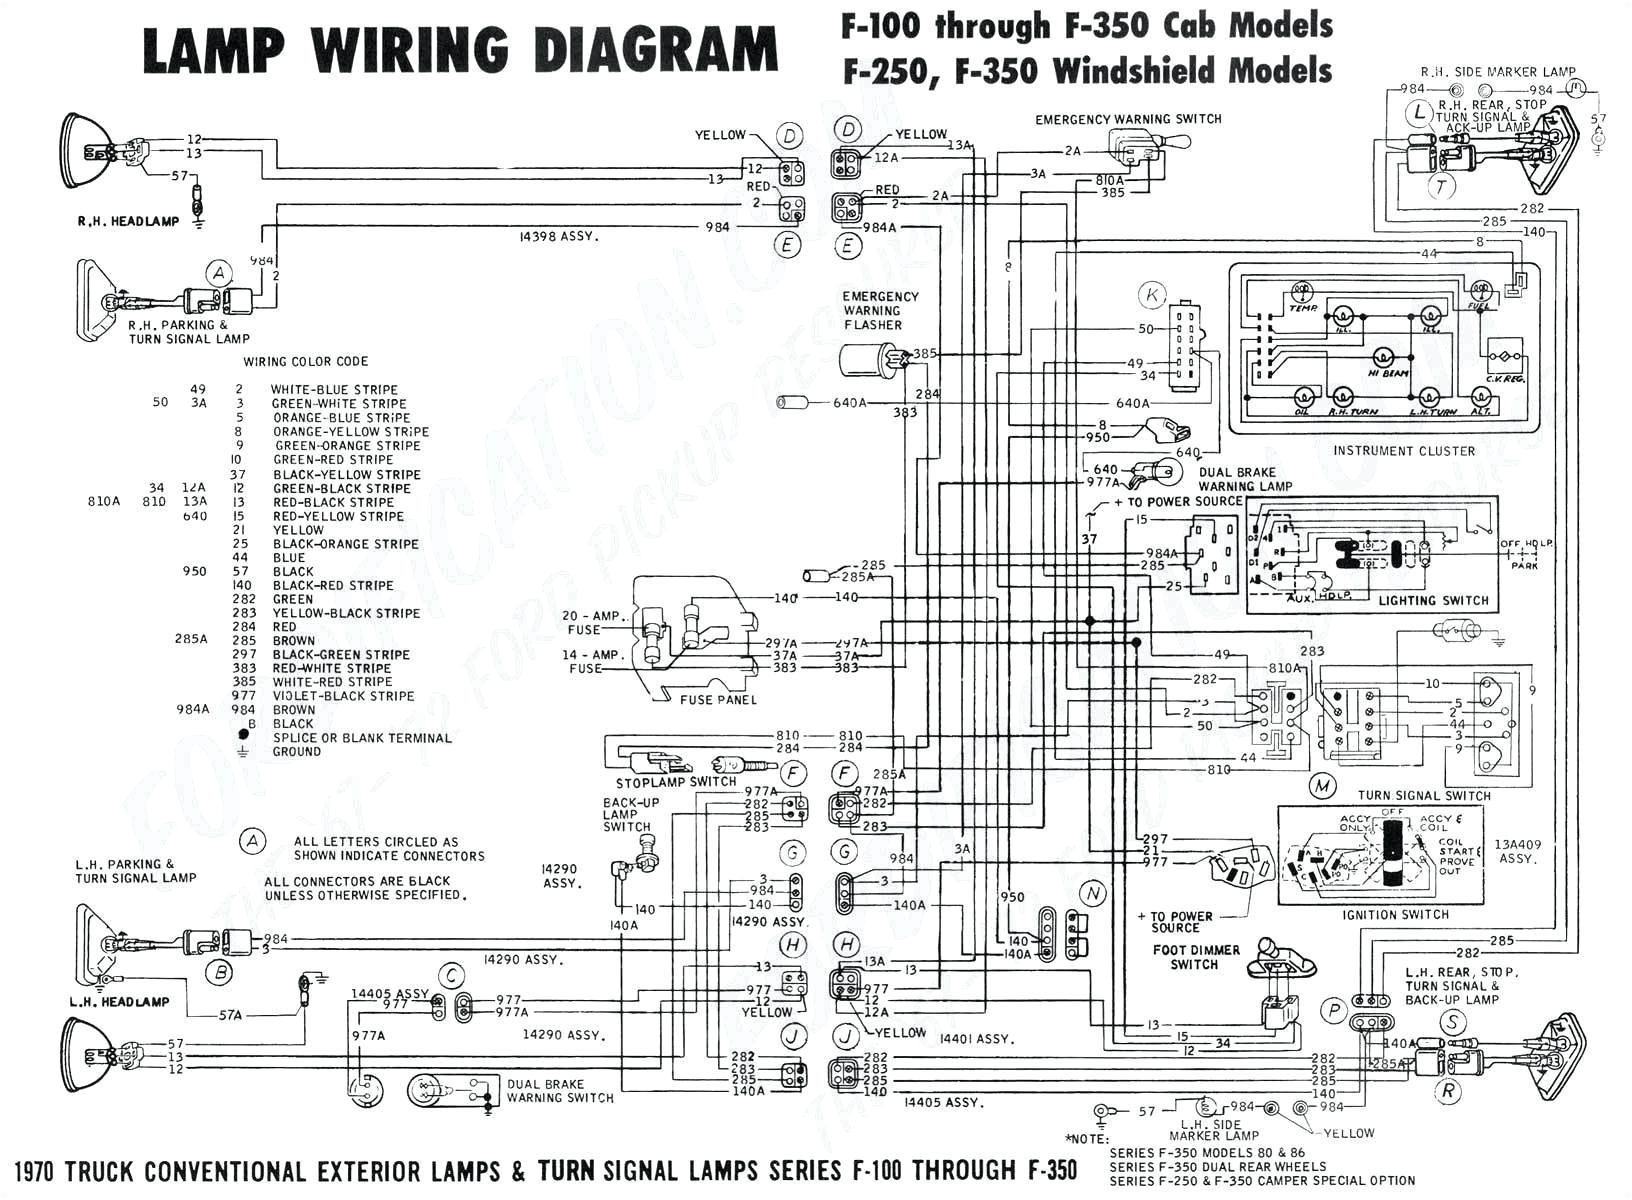 honeywell thermostat installation diagram wiring diagram database circuit diagram likewise bad ignition control module on lennox wiring